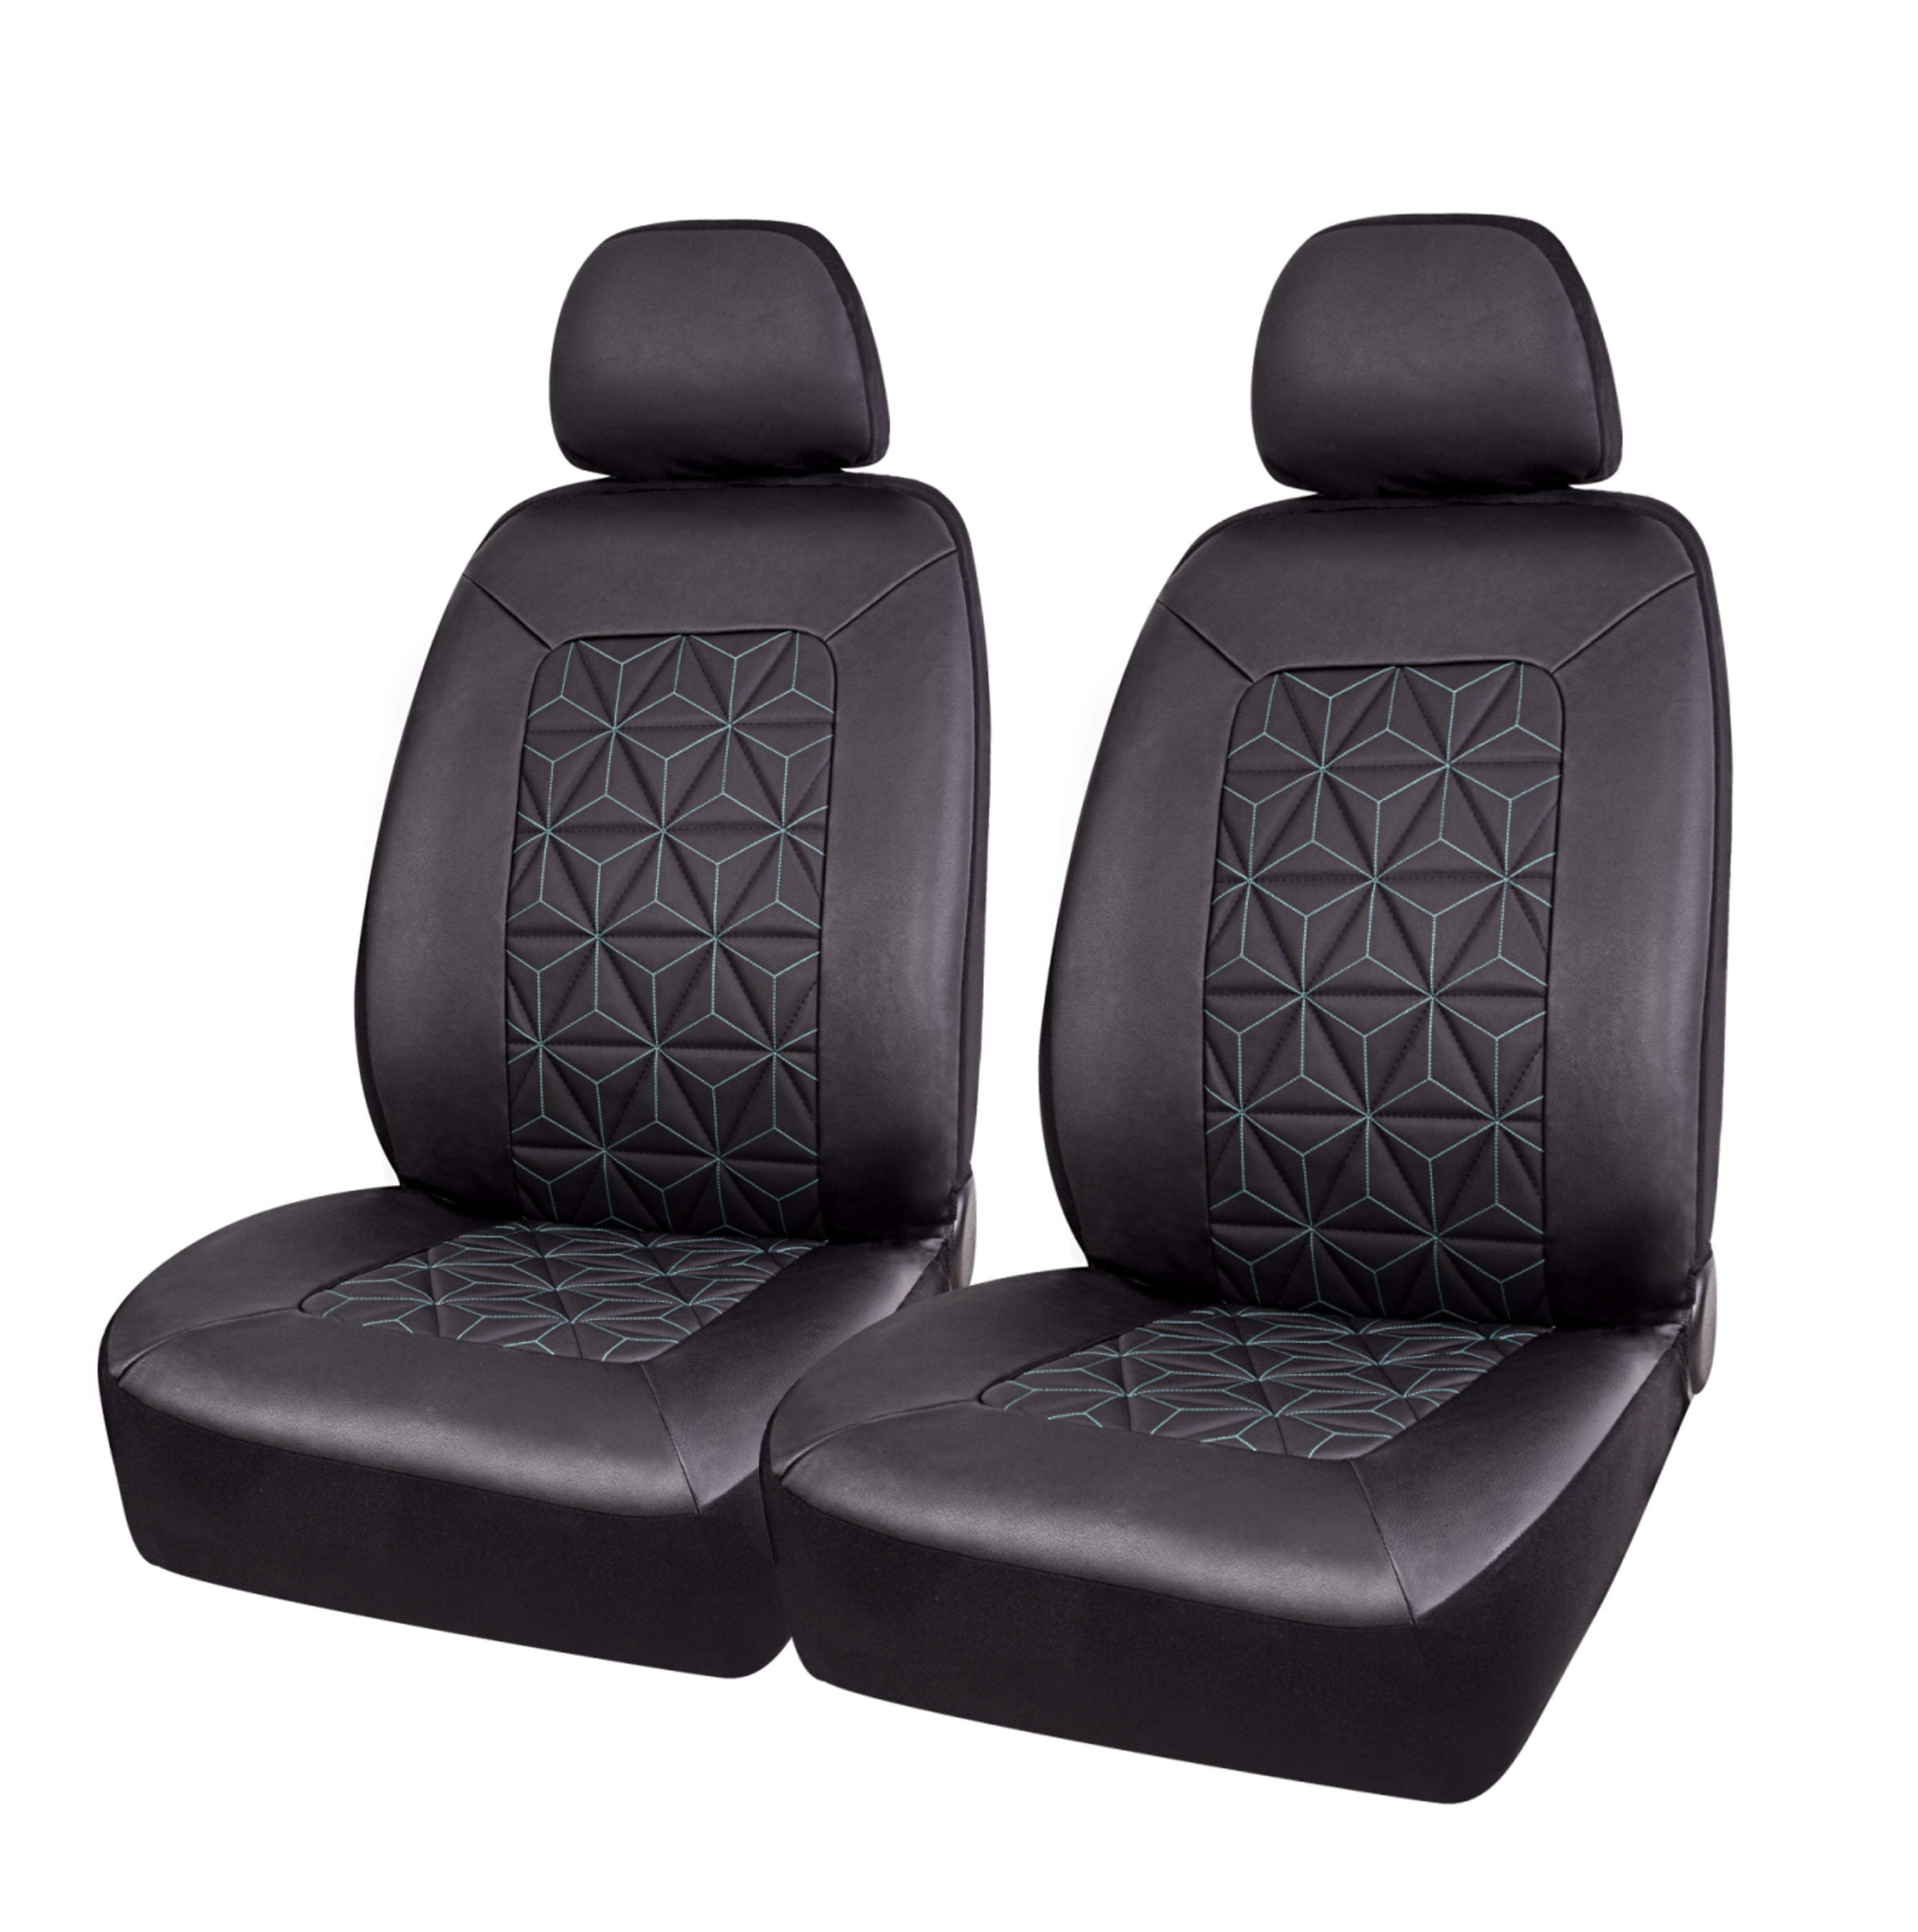 ISUZU D-MAX 11 FRONT LEATHER LOOK PAIR CAR SEAT COVER SET 